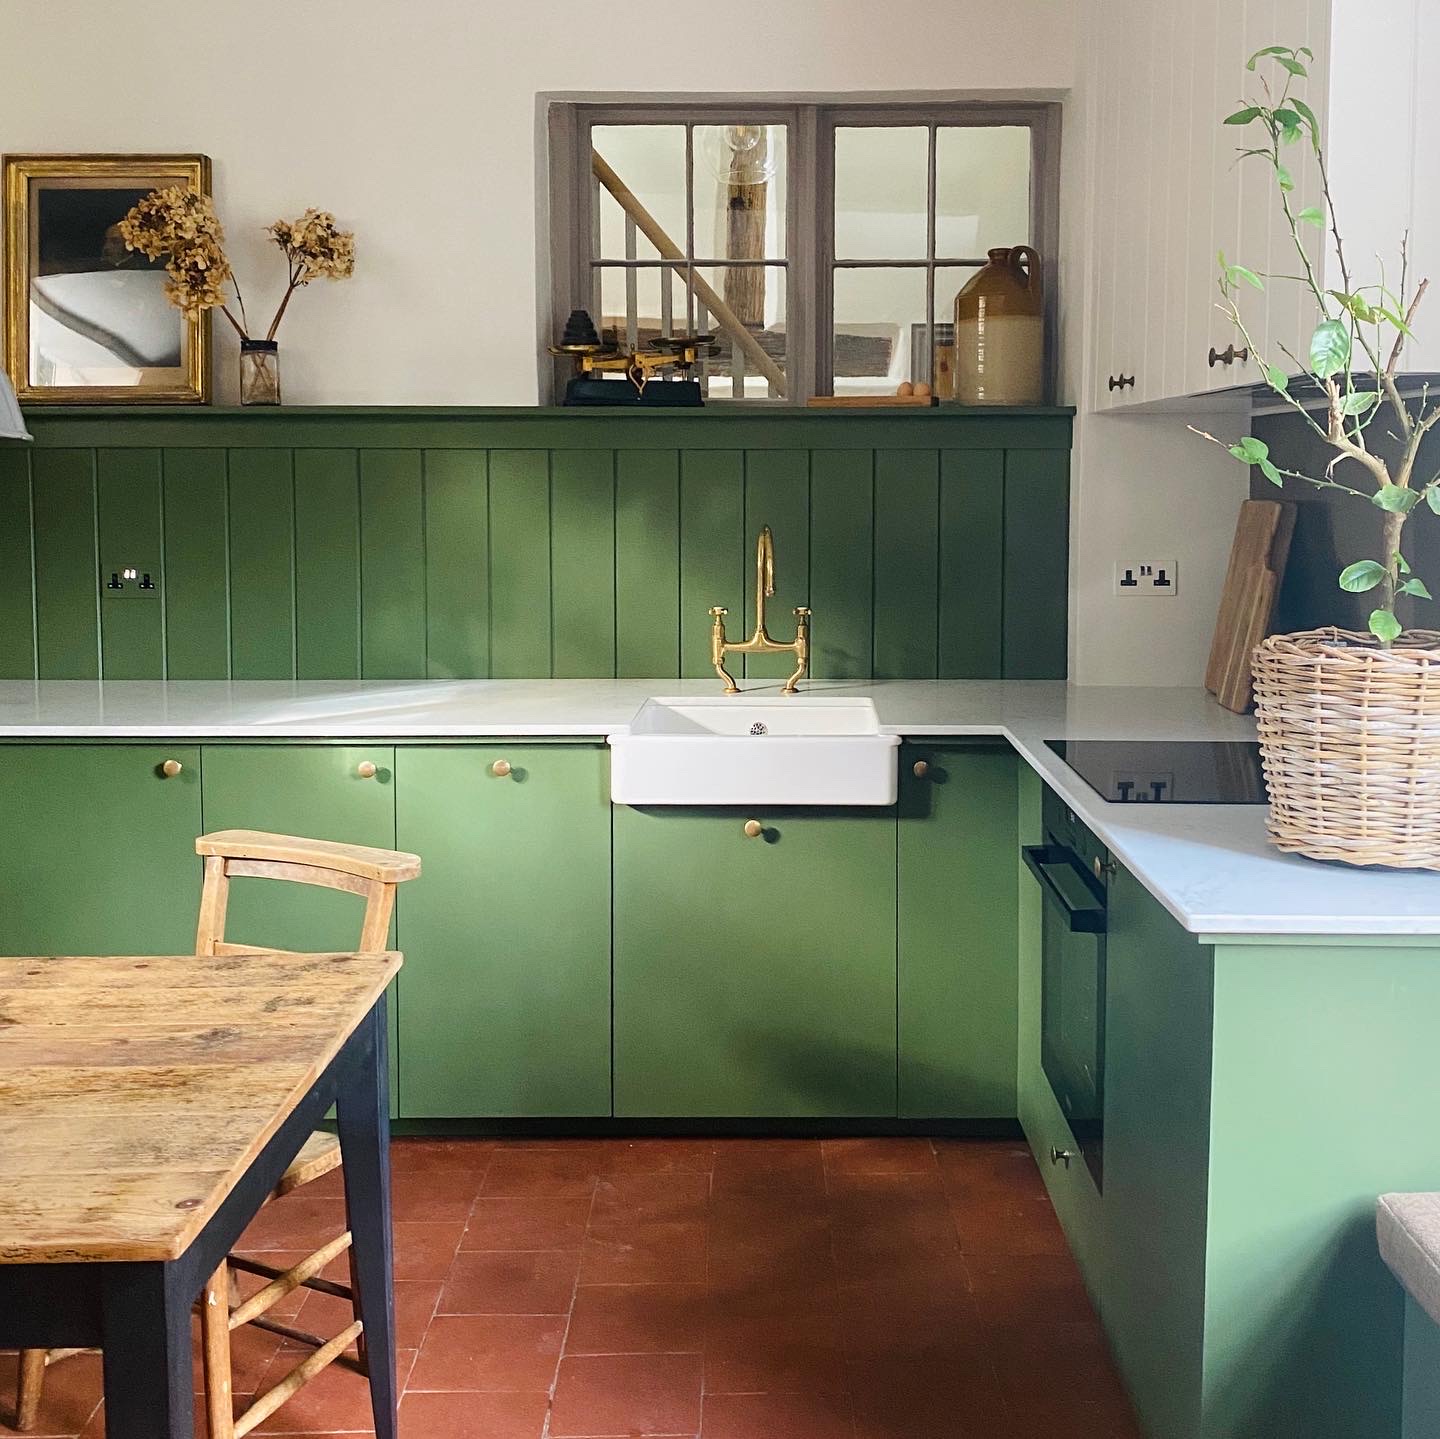 The 10 Best Ikea Kitchen S For A, Ikea Unfinished Wood Kitchen Cabinets